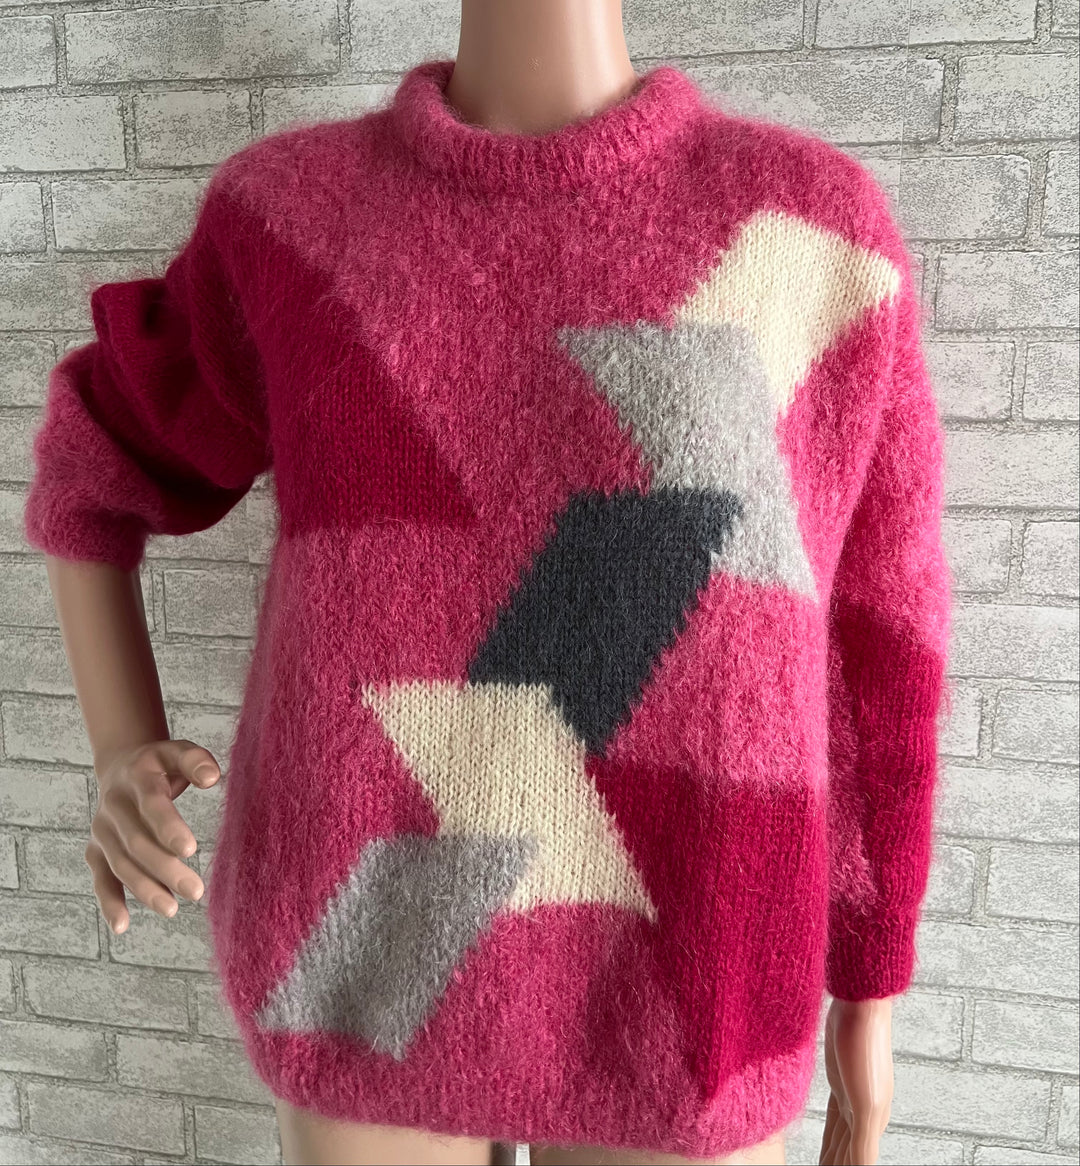 Vintage Red and Pink Sweater.